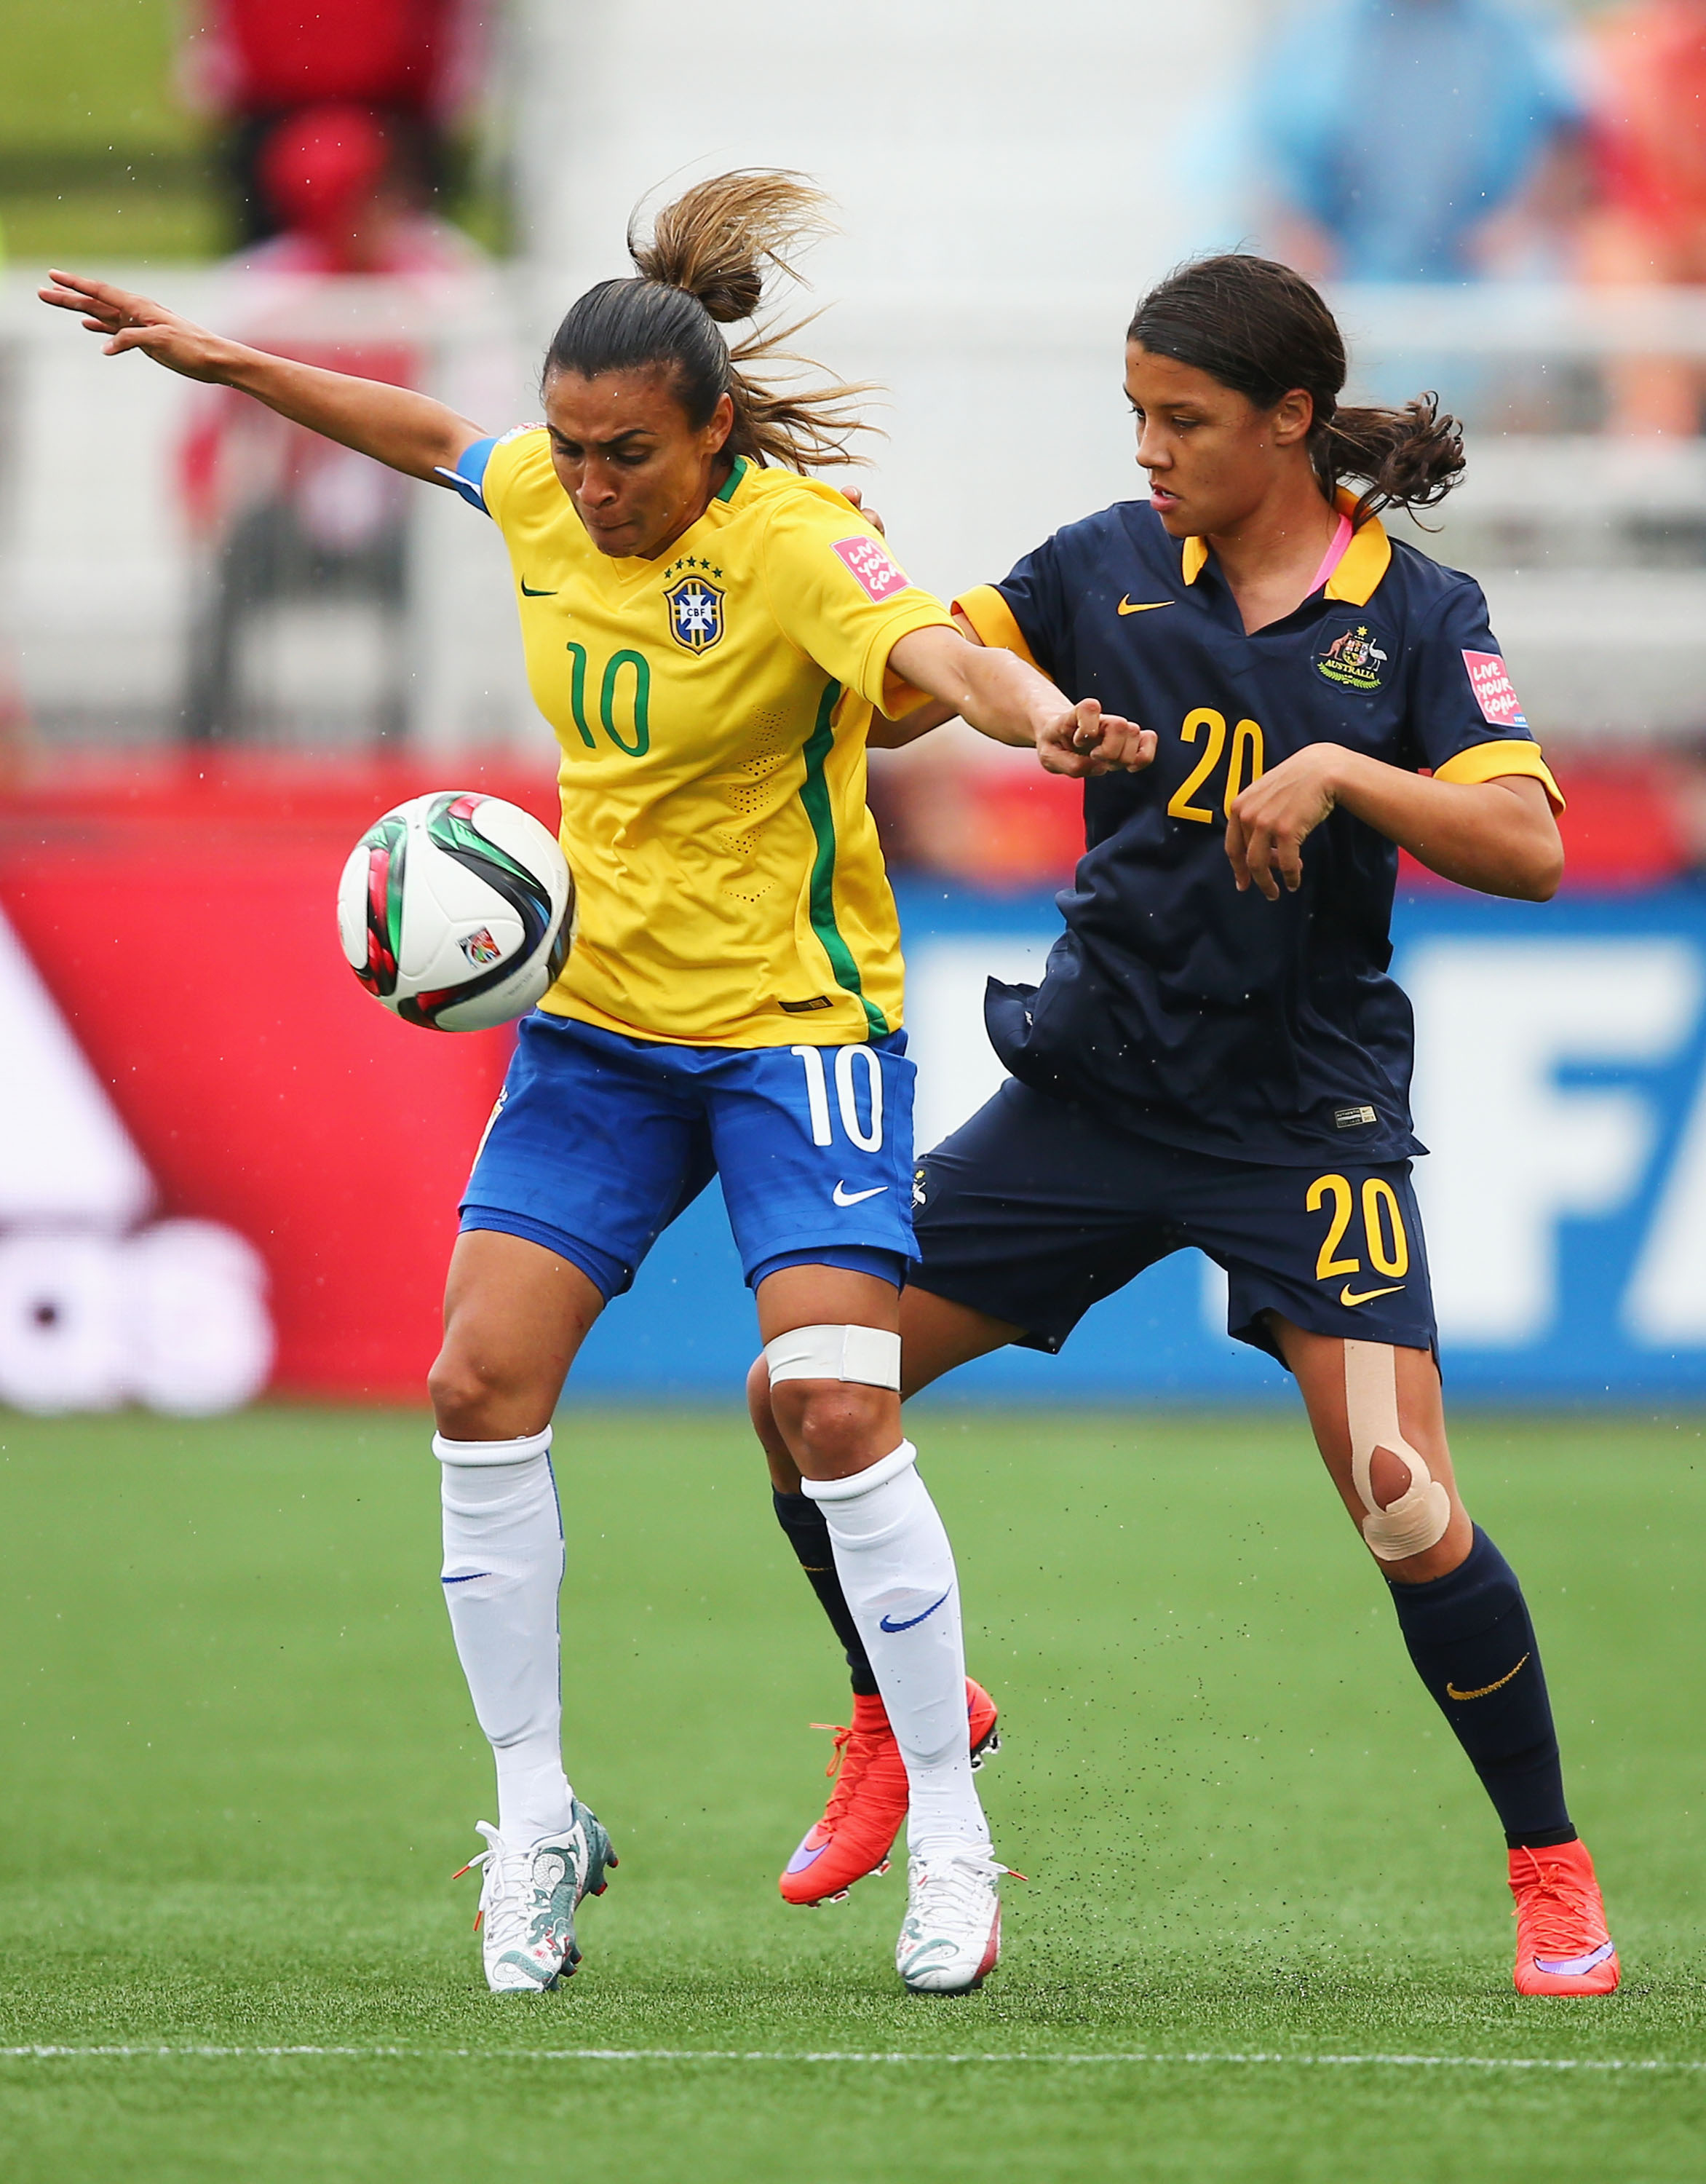 Sam Kerr shuts down Brazil's superstar Marta and was relentless with her run all game.